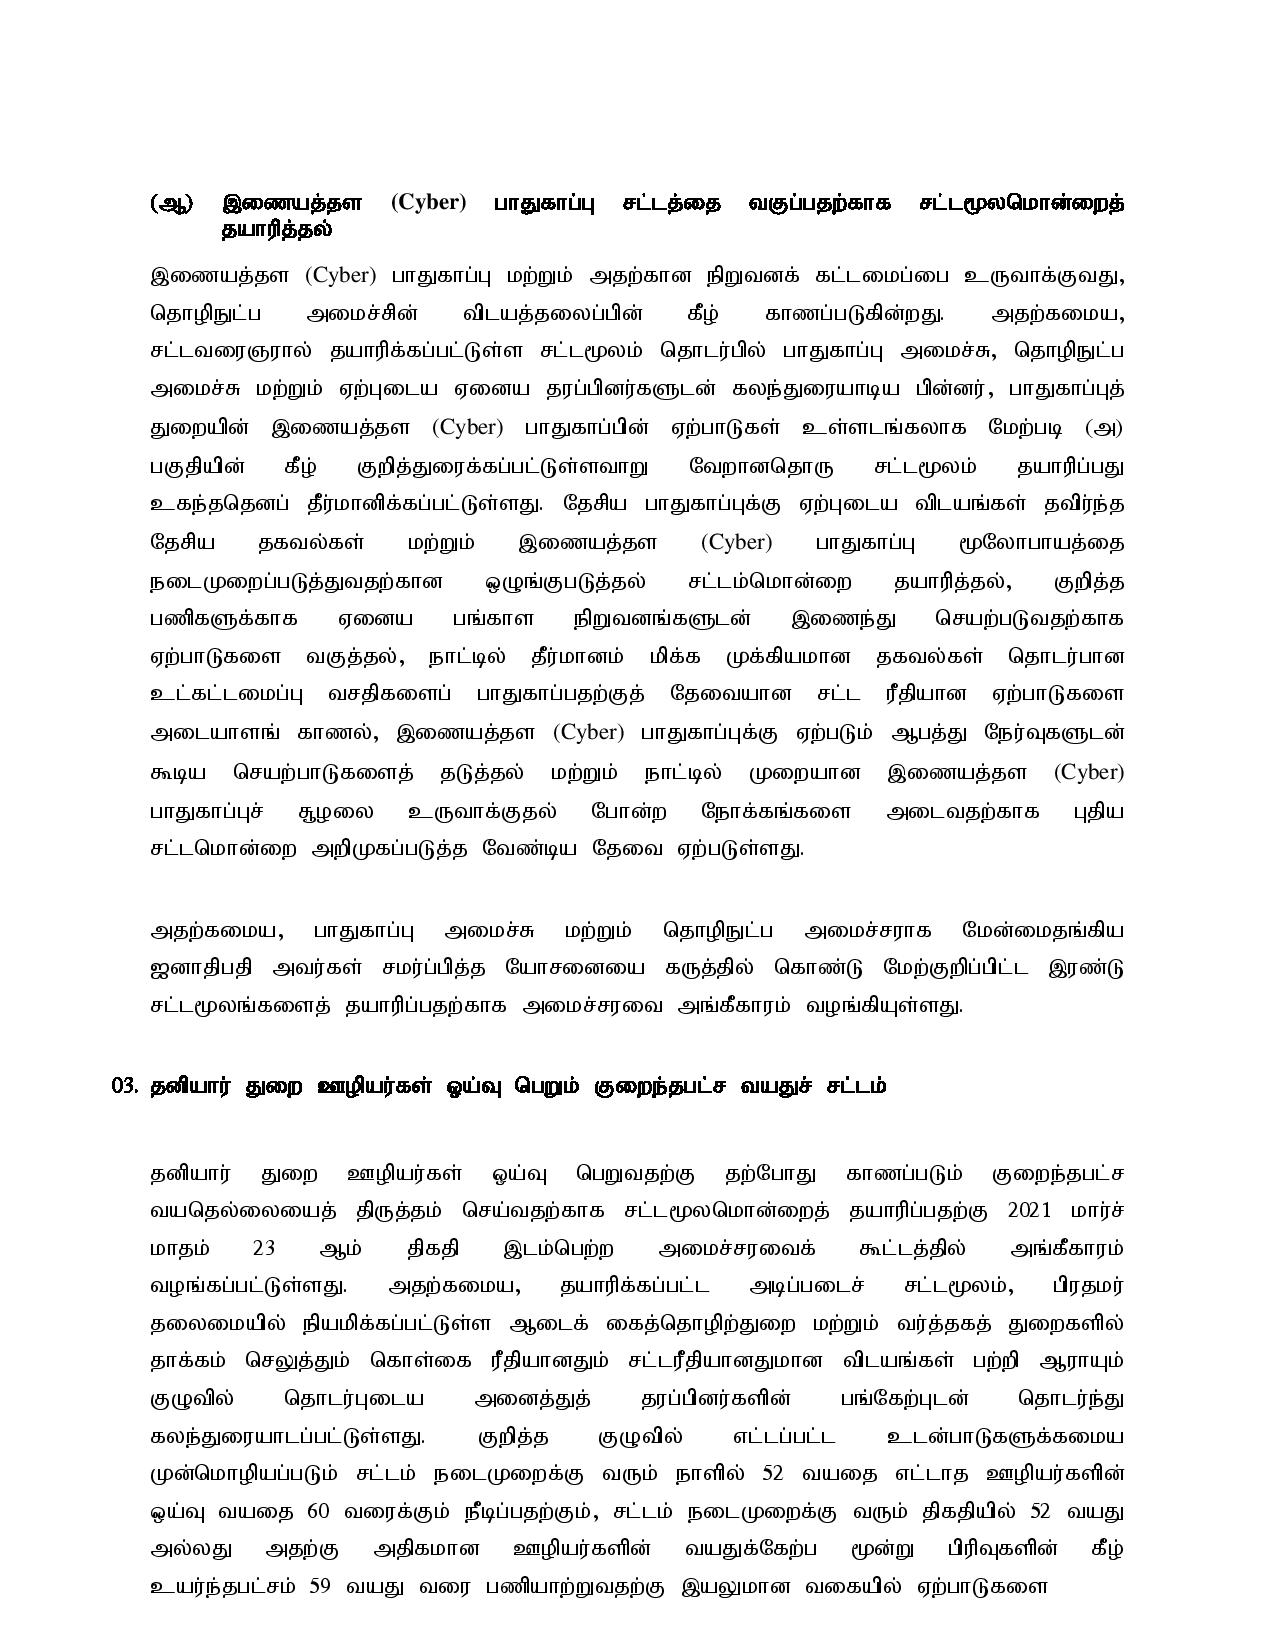 Cabinet Decisions on 11.10.2021 T page 002